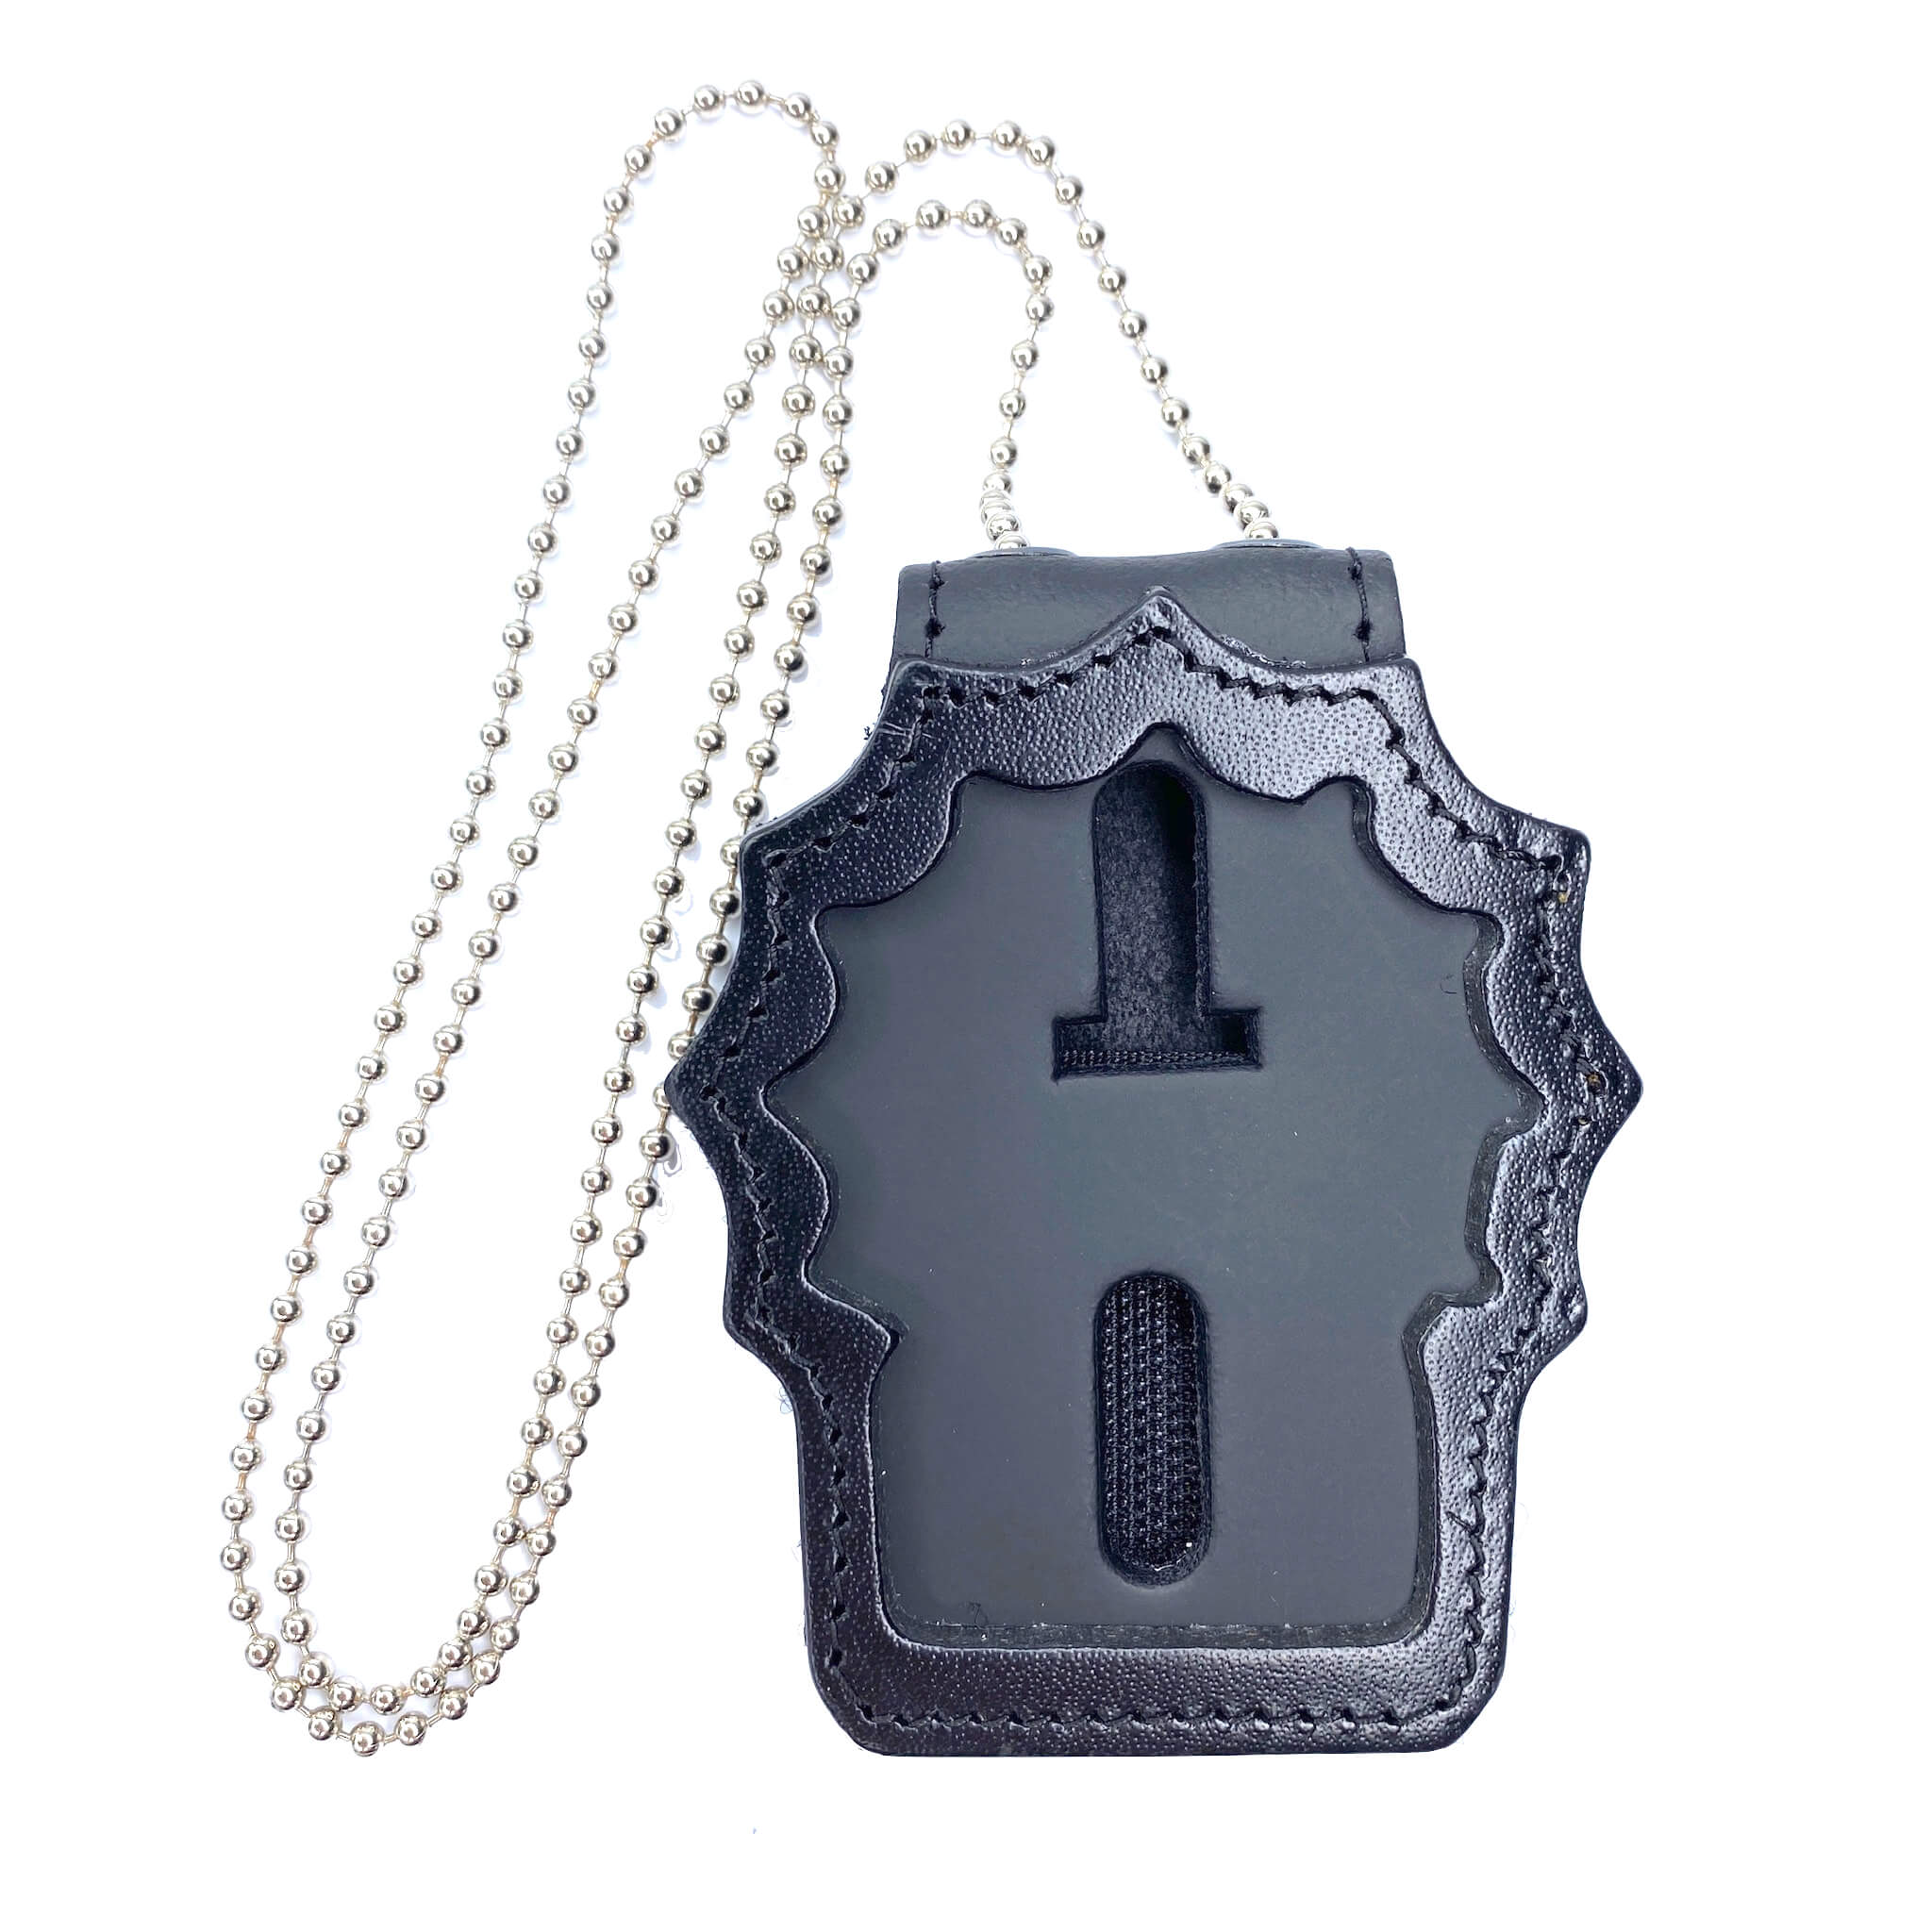 New York Police Department (NYPD) Detective Badge Belt Holder & Neck Chain